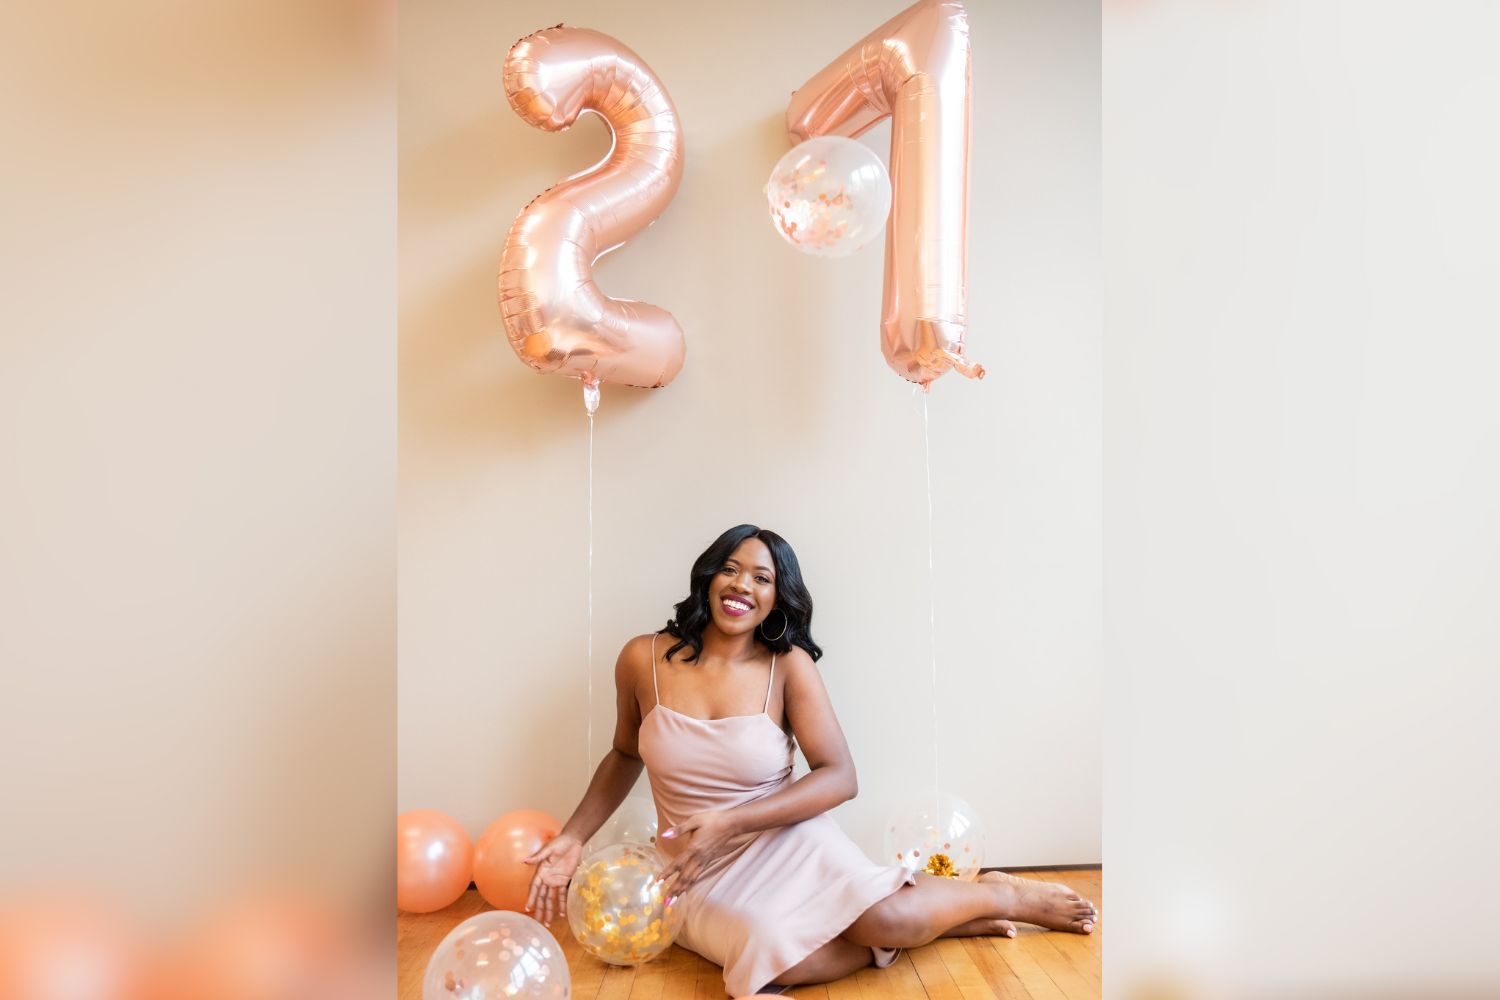 20 Original Birthday Photoshoot Ideas That You Must Try